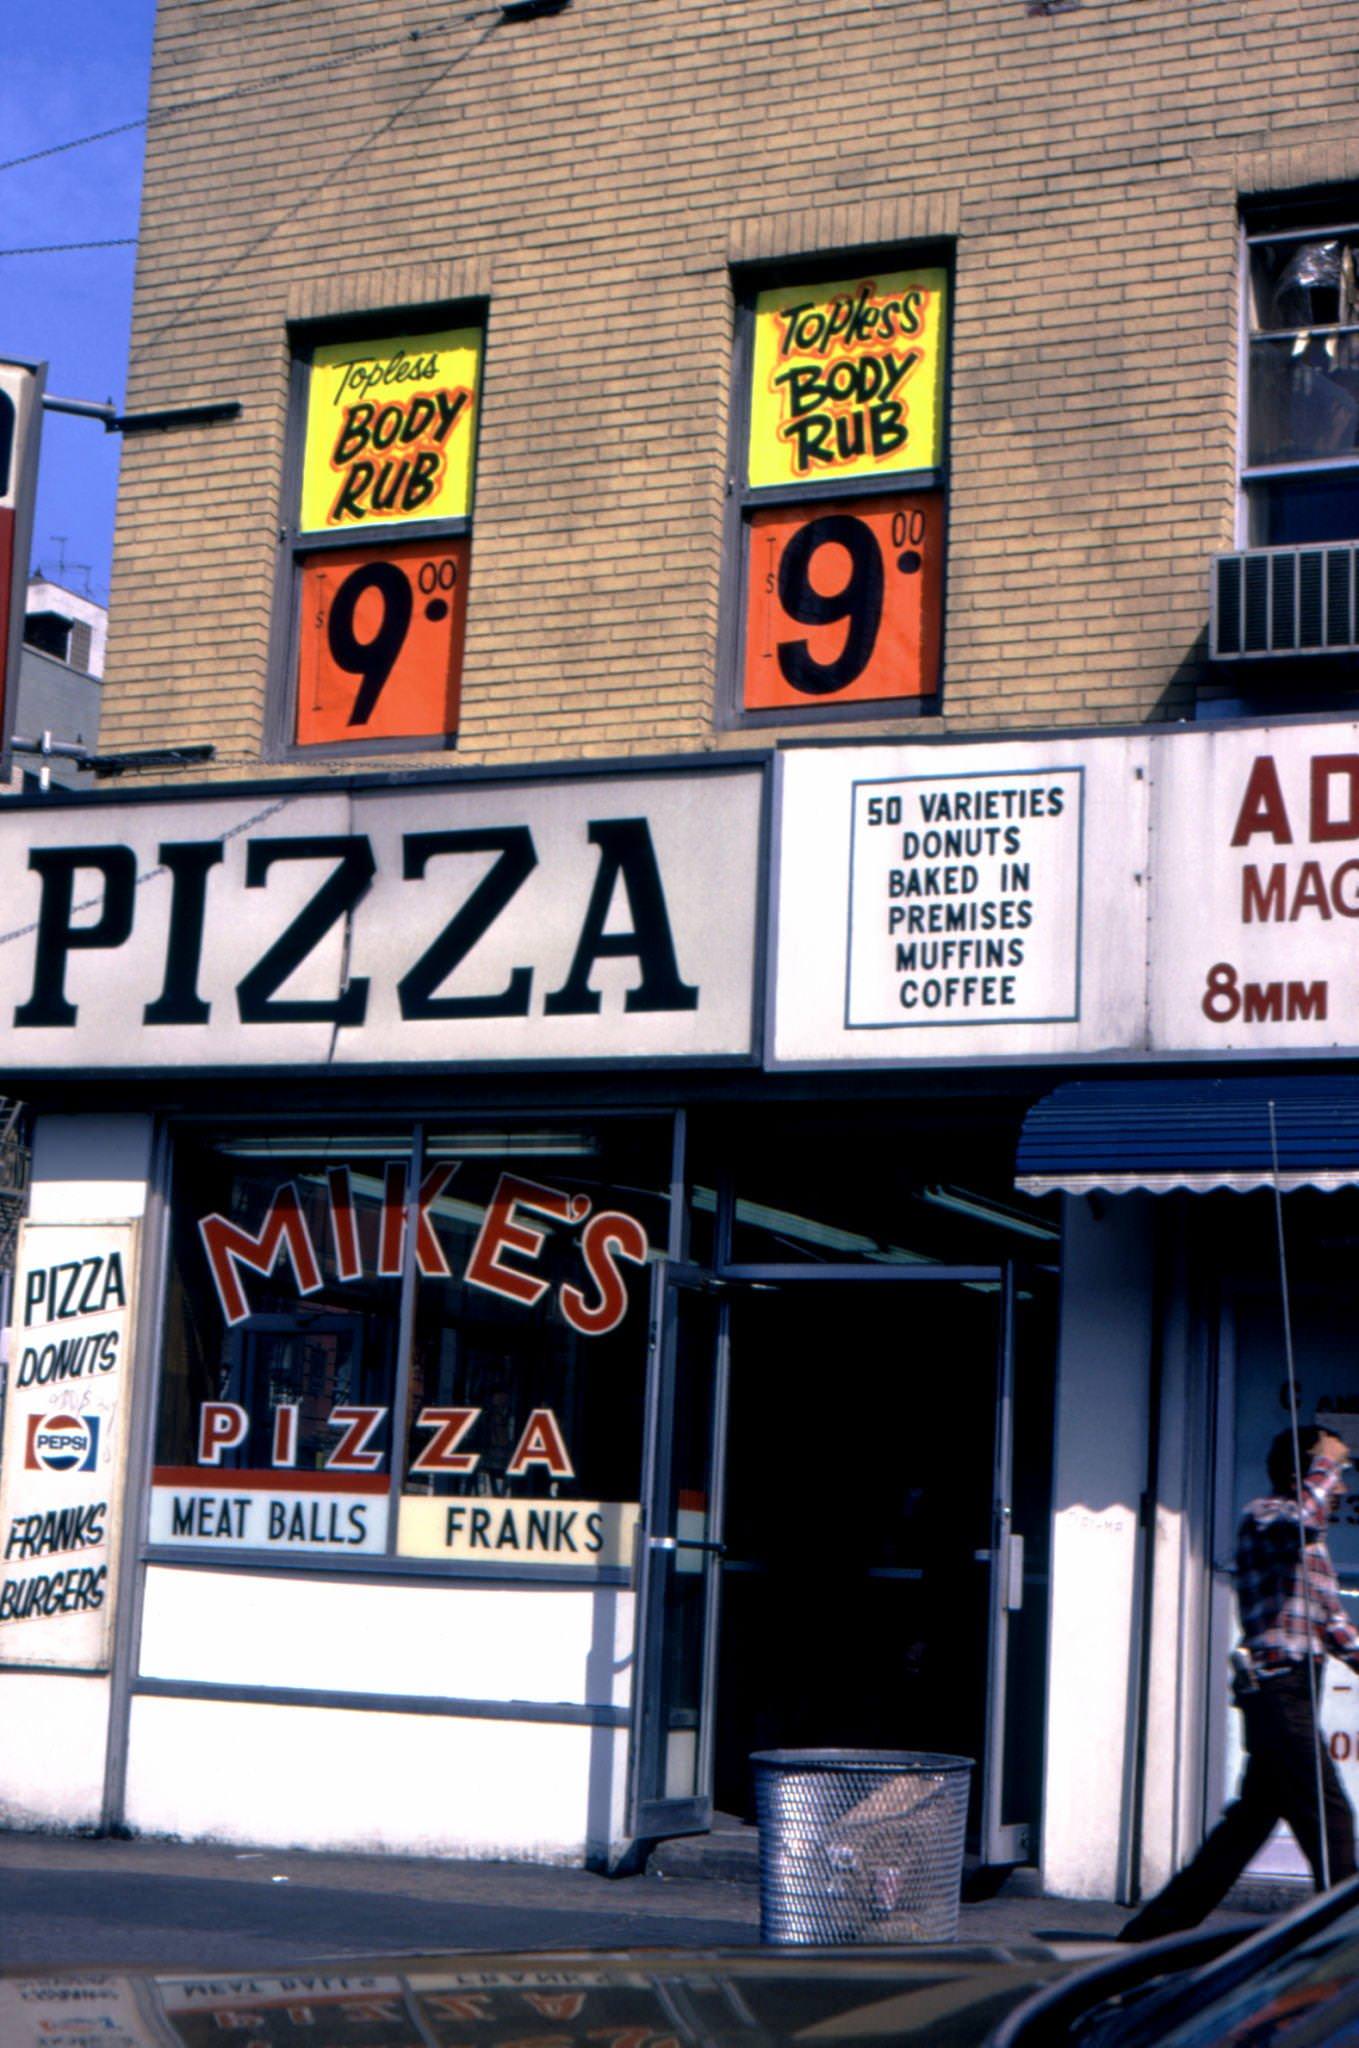 Pedestrian Passes A Pizzeria, Mike'S Pizza, And A Topless Massage Parlor In Lower Manhattan, 1975.